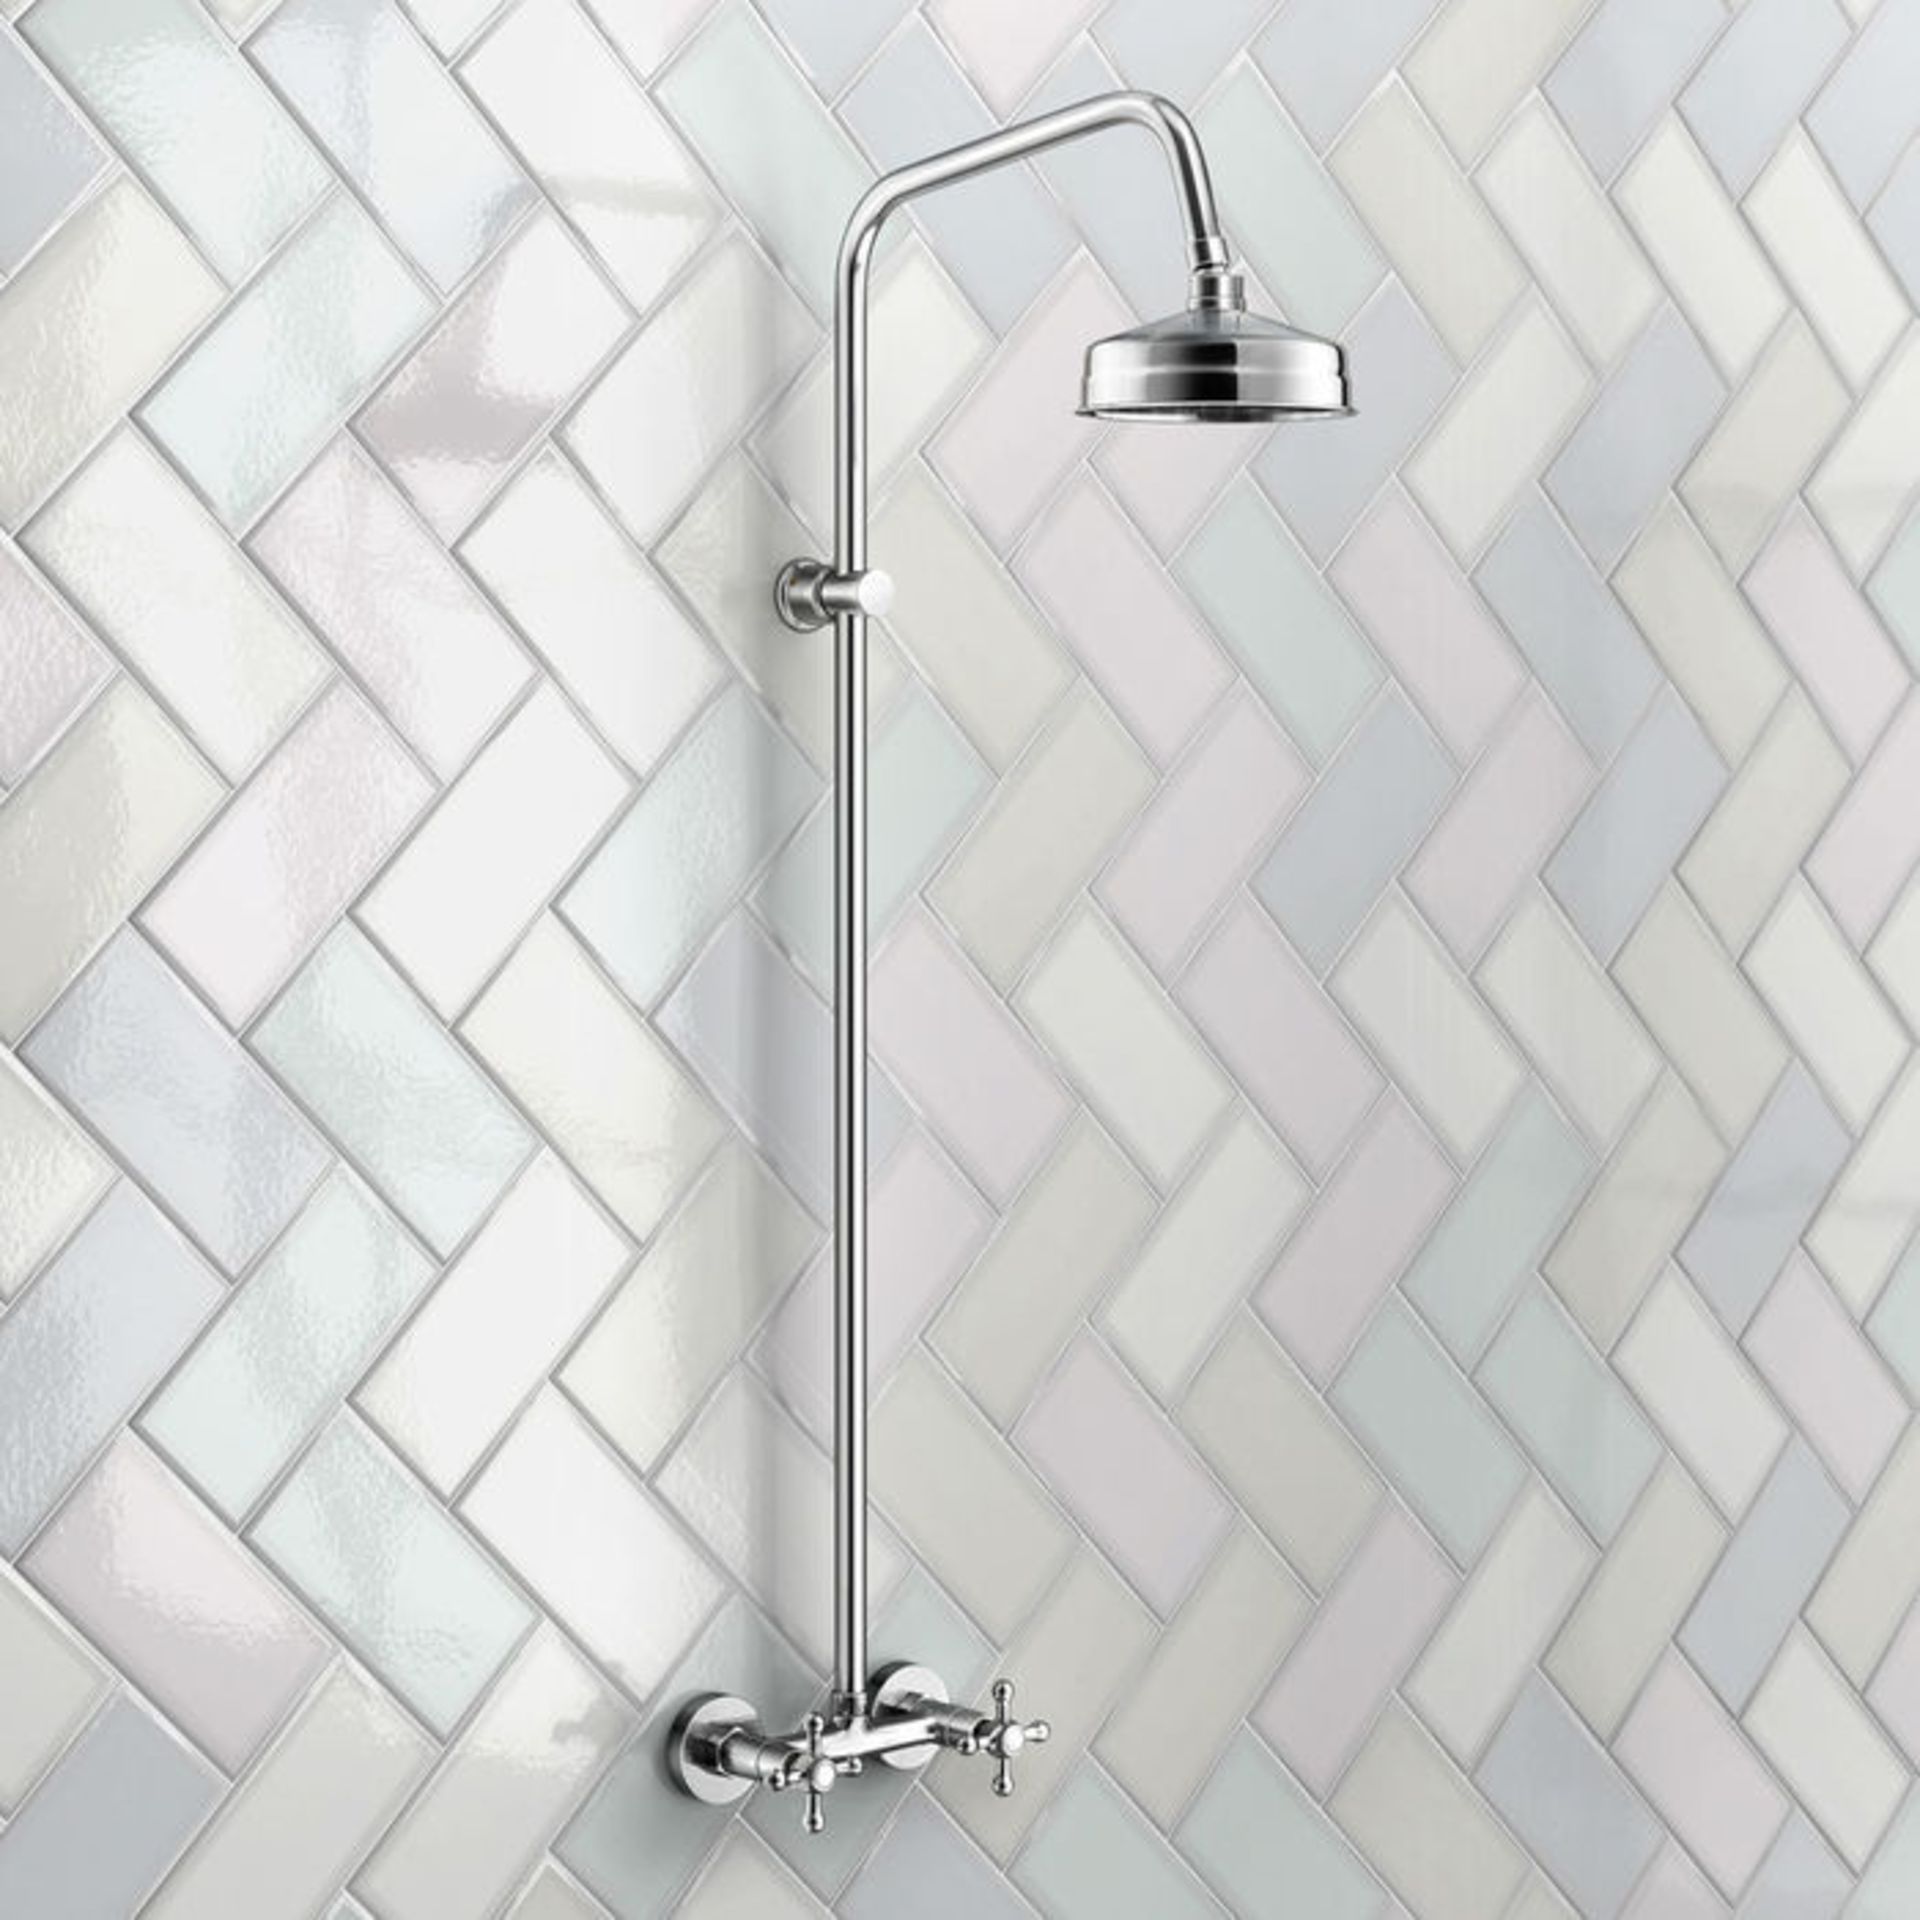 (ZL31) Traditional Exposed Shower & Medium Head. Exposed design makes for a statement piece Stunning - Image 3 of 3